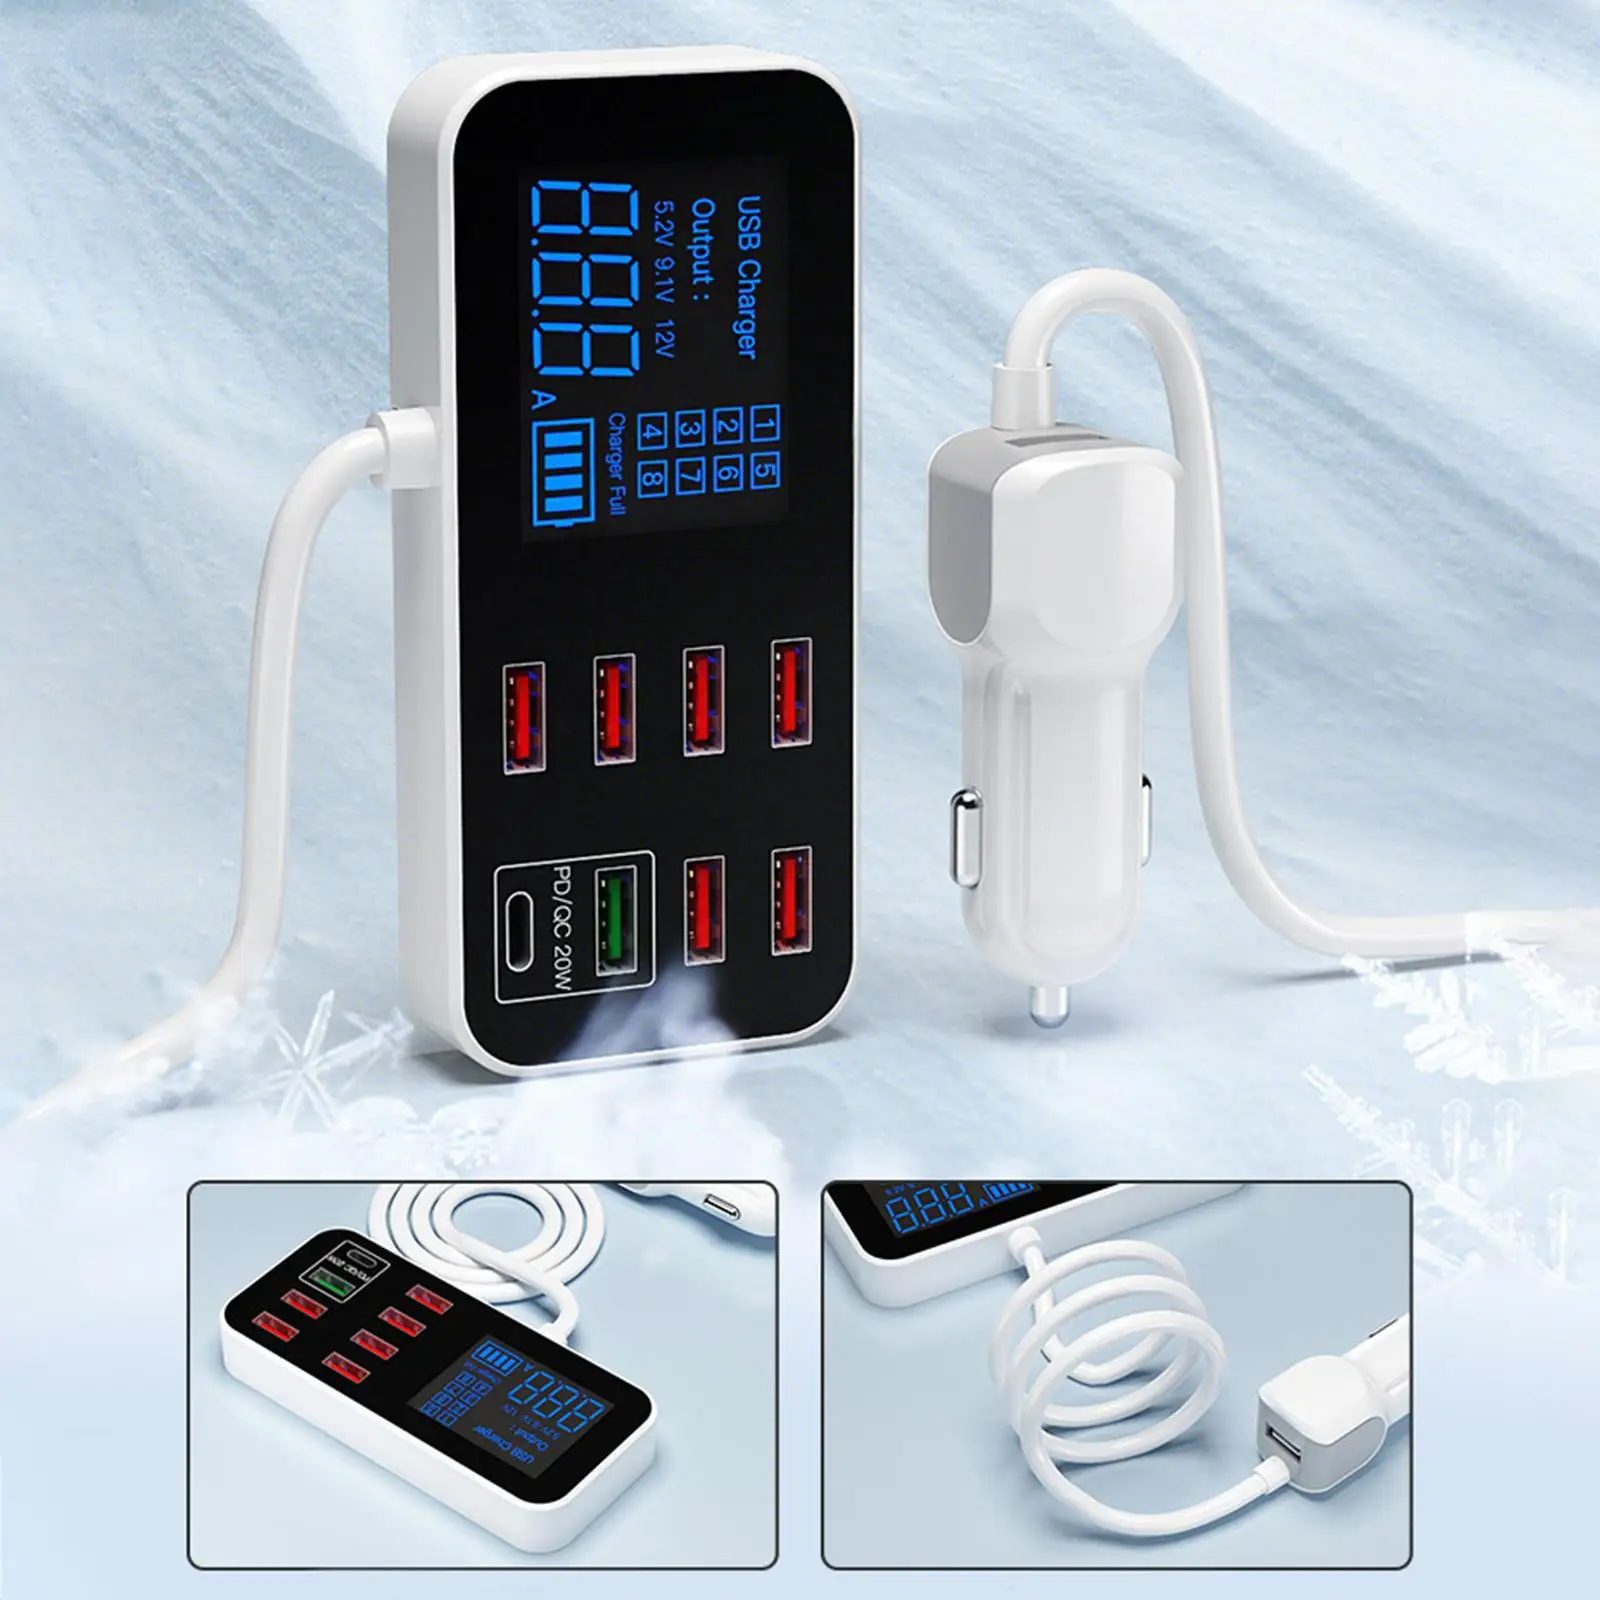 s USB Car Charger, 9 Ports Digital Display Lighter Adapter Fit for 